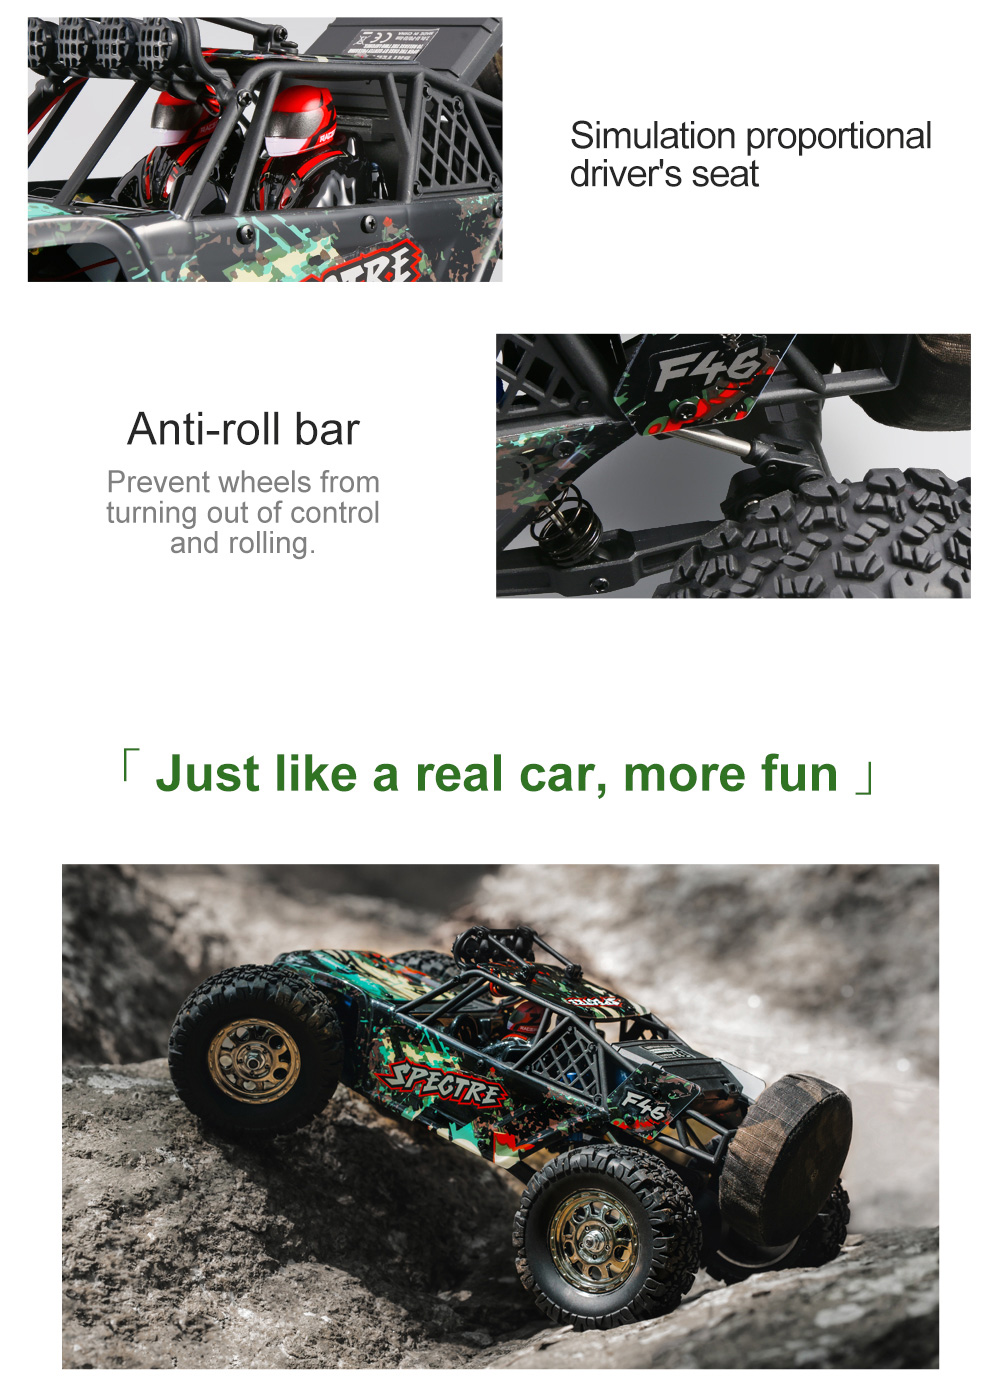 HBX-16886-114-4WD-24G-RC-Car-Off-Road-Desert-Truck-Brushed-Vehicle-Models-Full-Proportional-Control-1866160